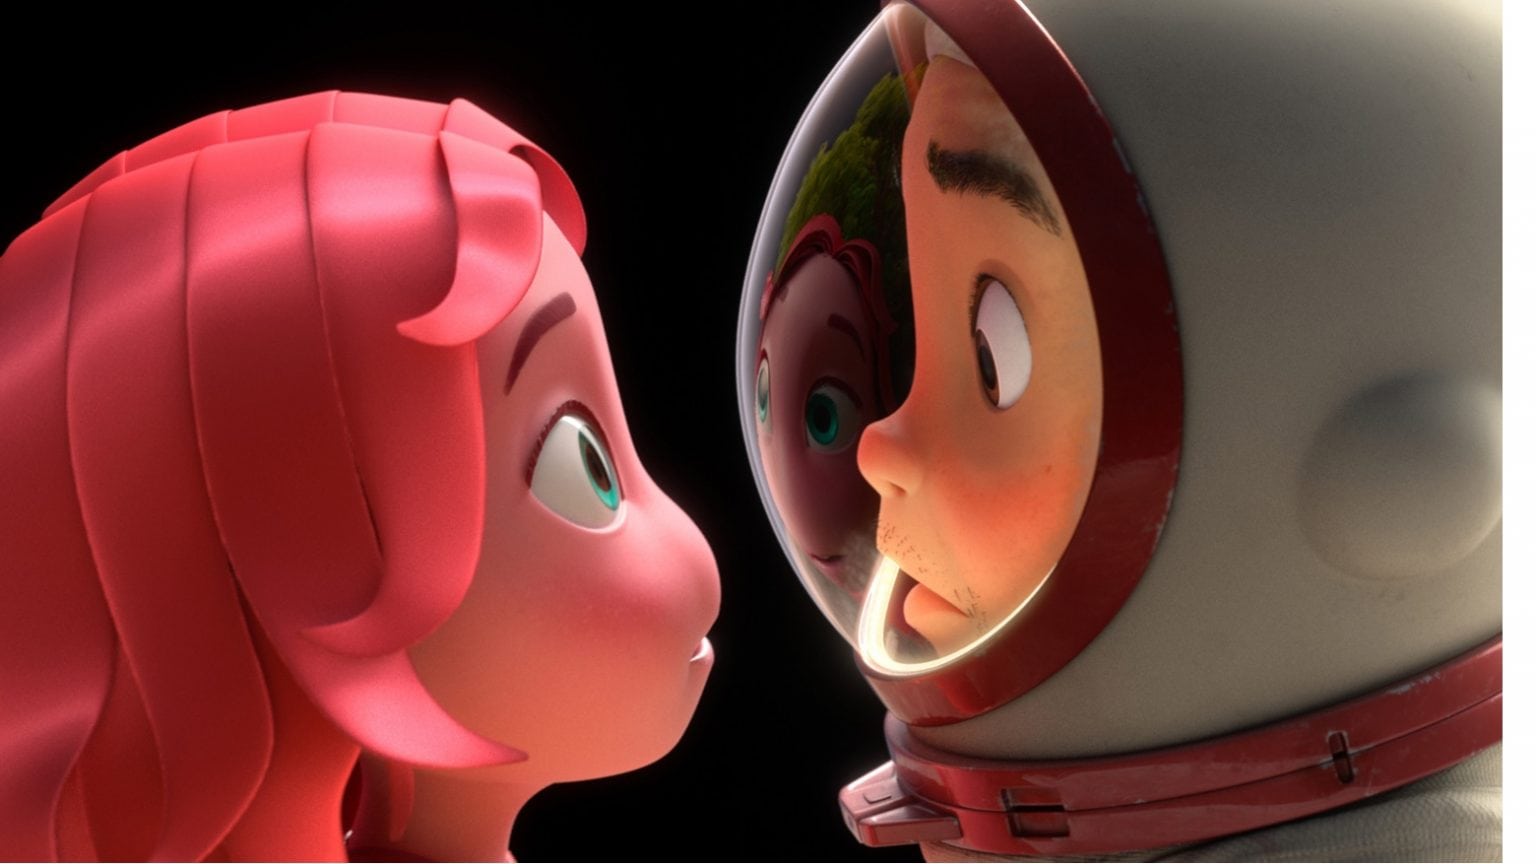 Adorable sci-fi romance Blush warms up Apple TV+ on Oct. 1 | Cult of Mac